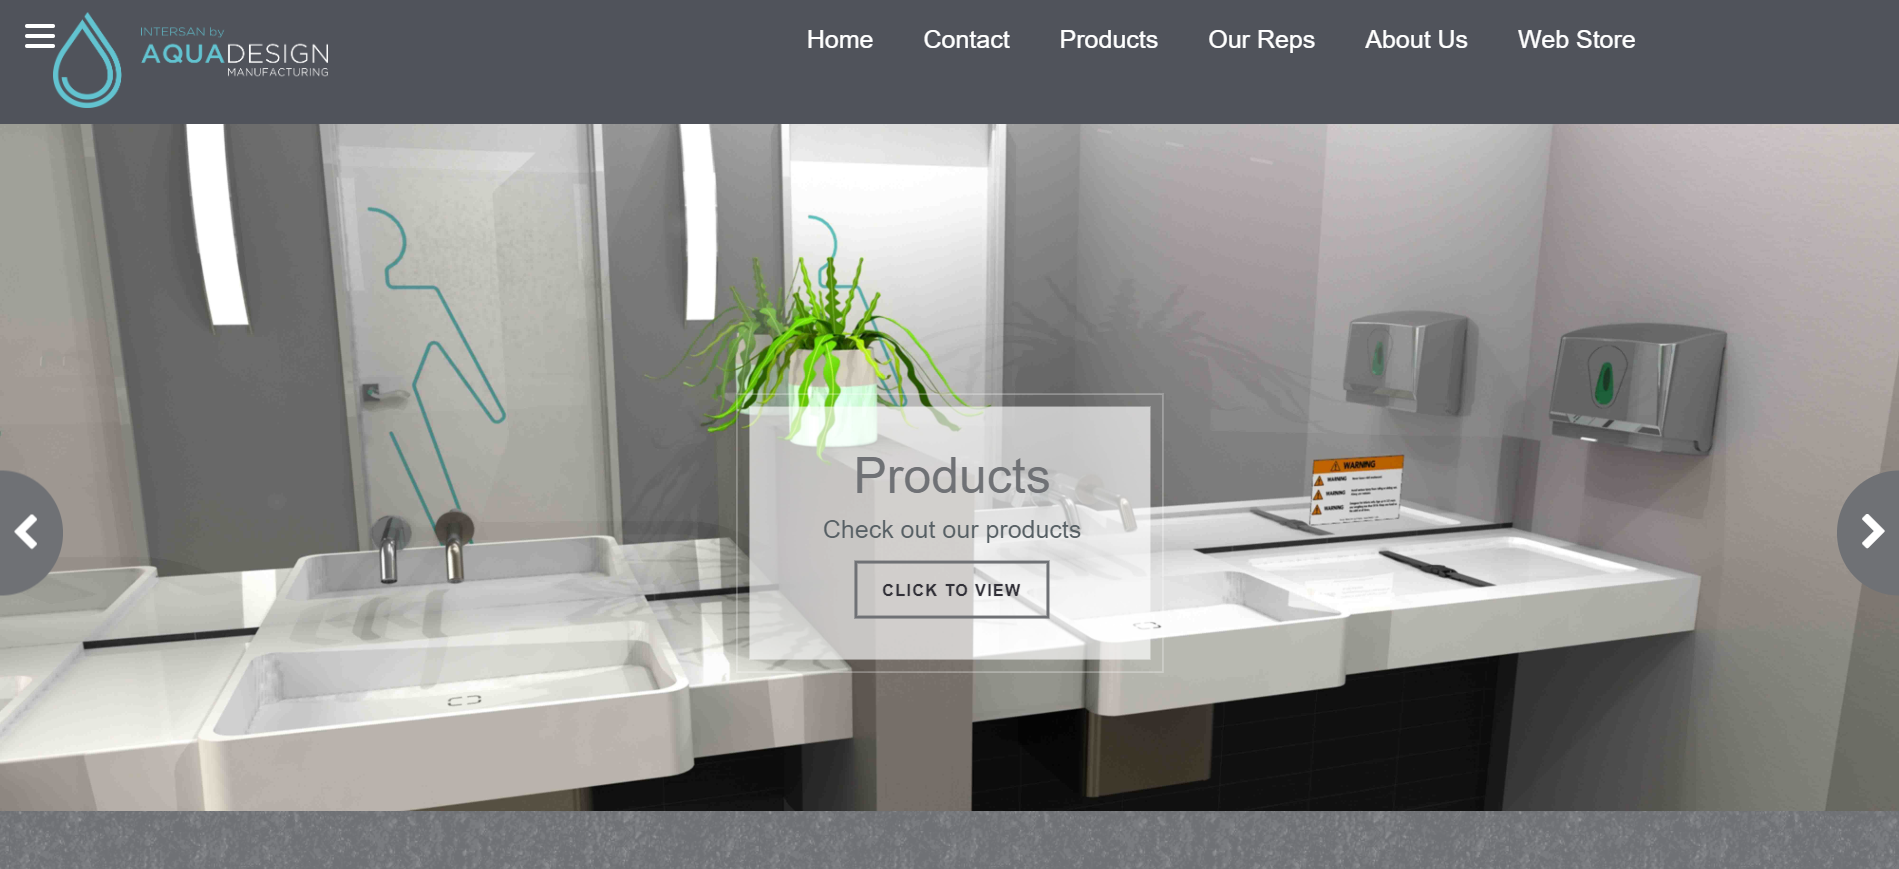 The intersan website for manufacturing sinks